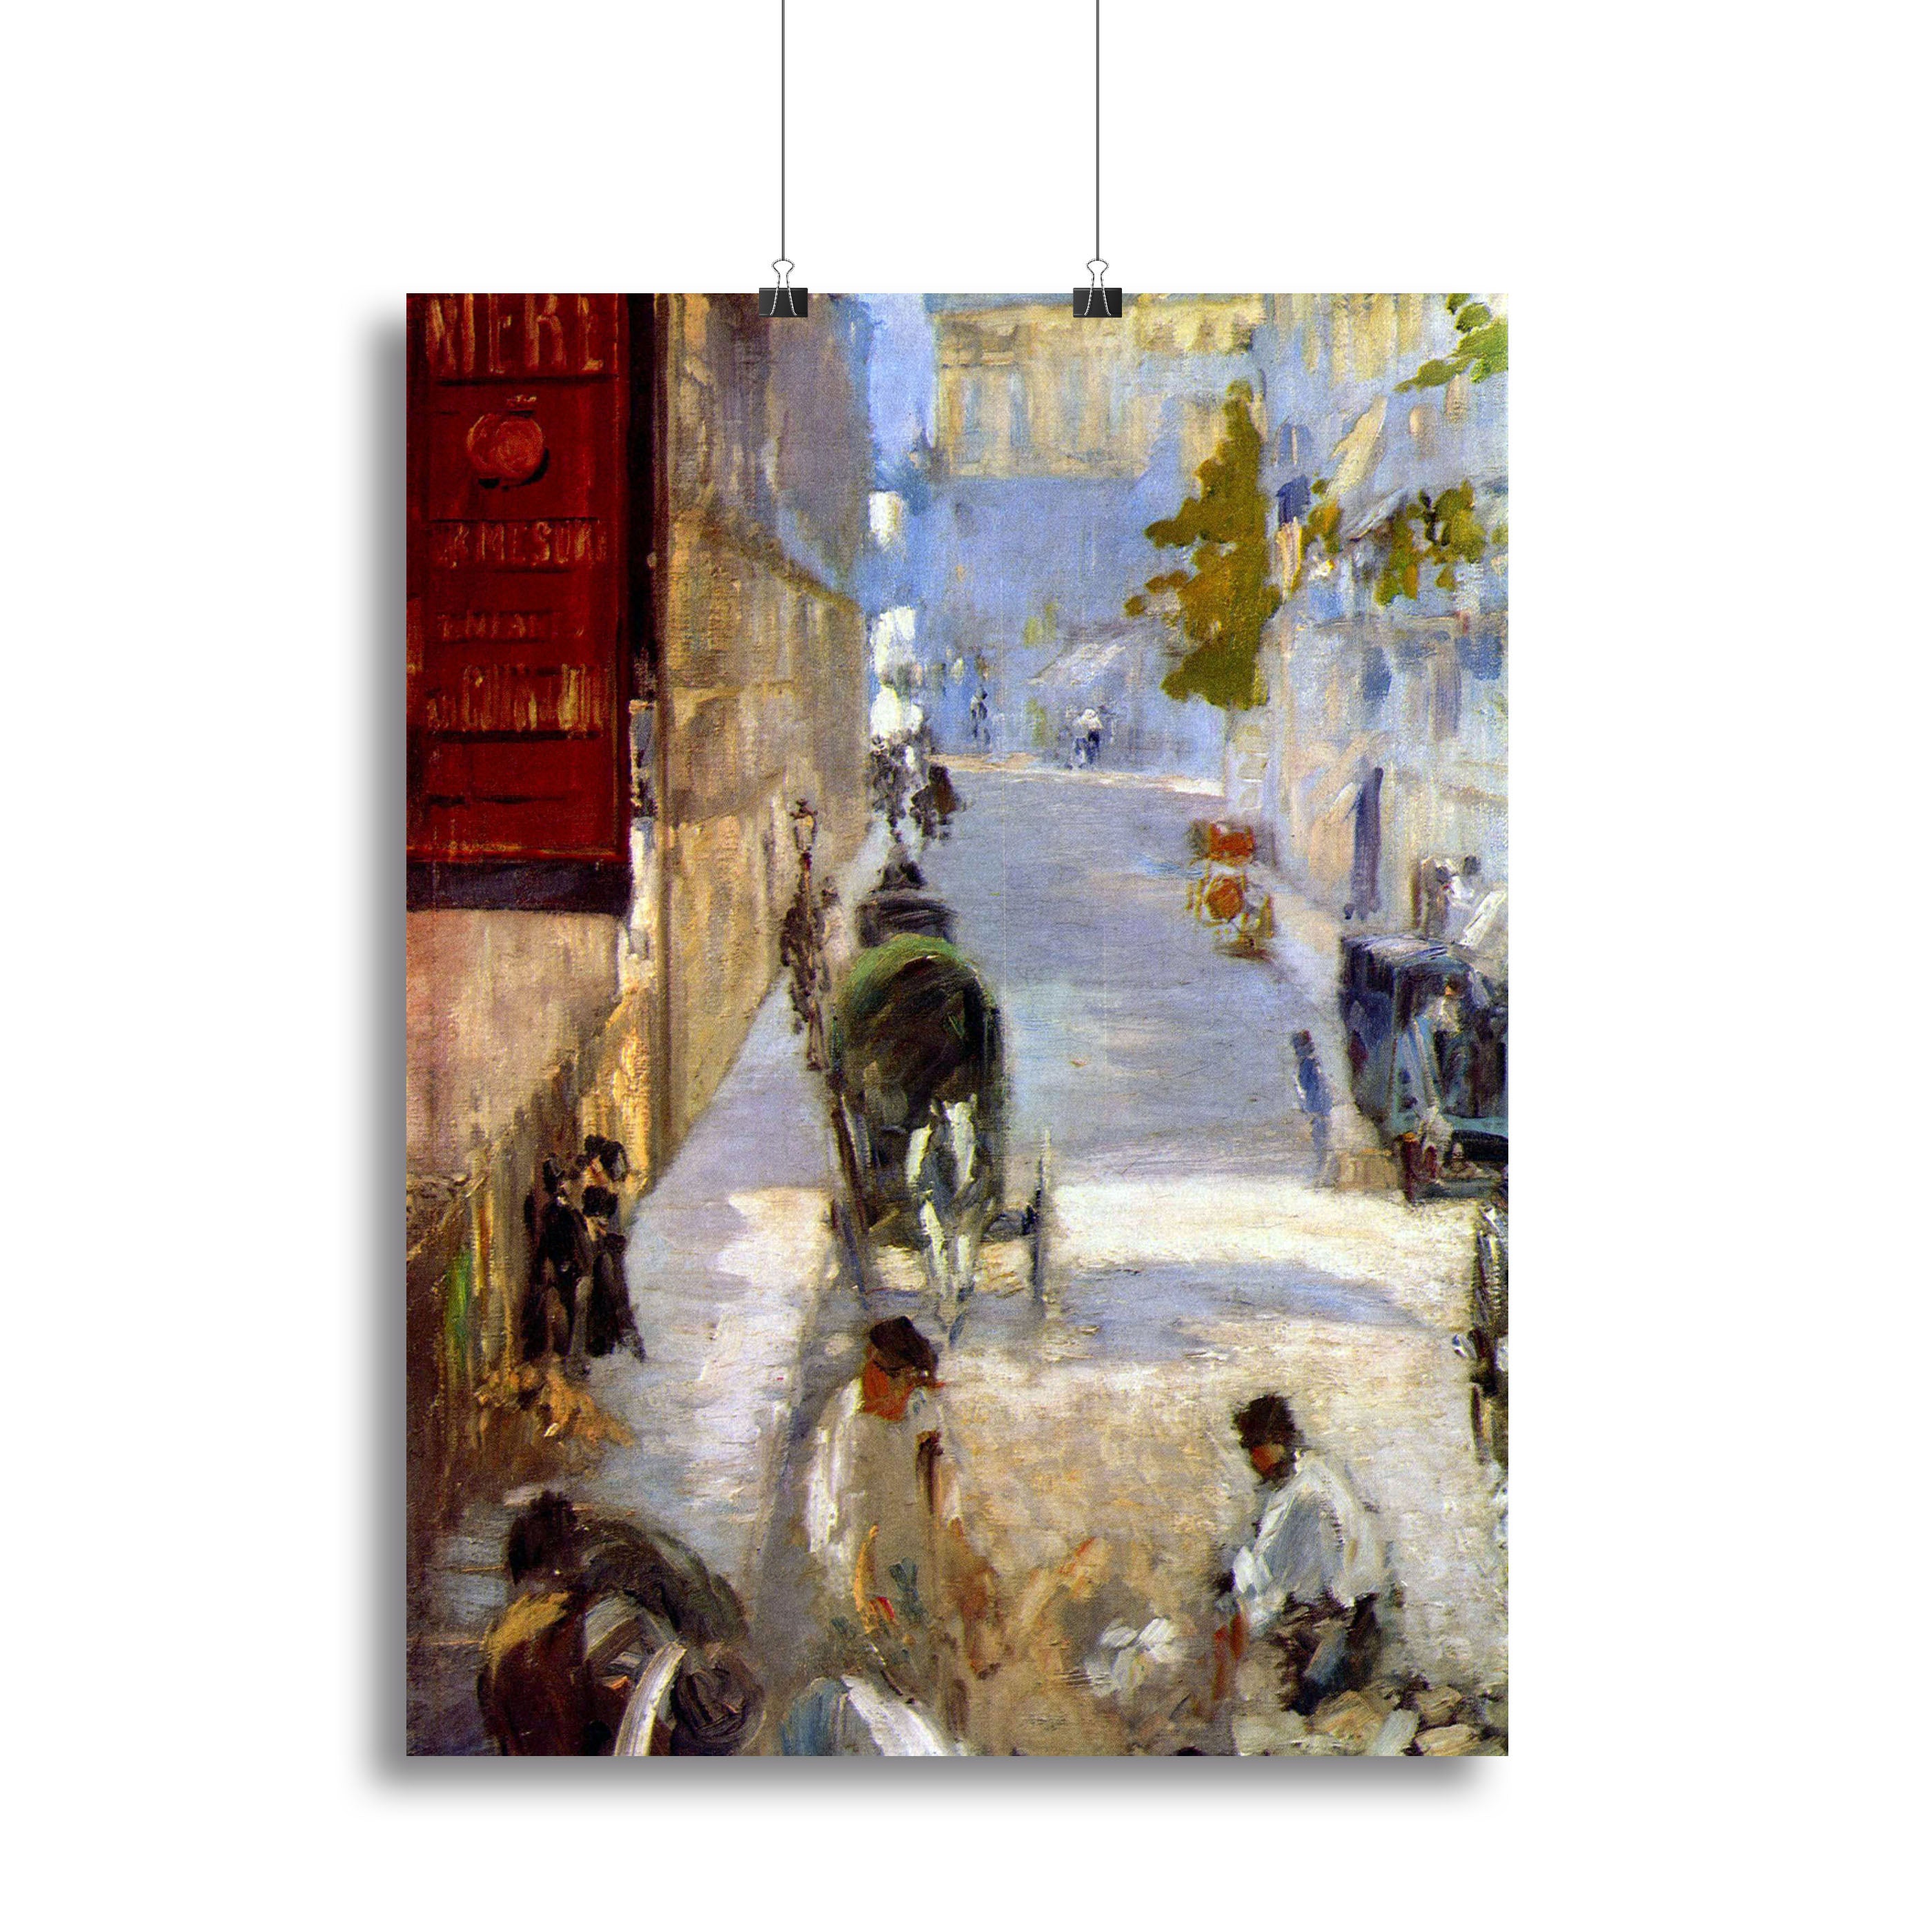 Road workers rue de Berne detail by Manet Canvas Print or Poster - Canvas Art Rocks - 2